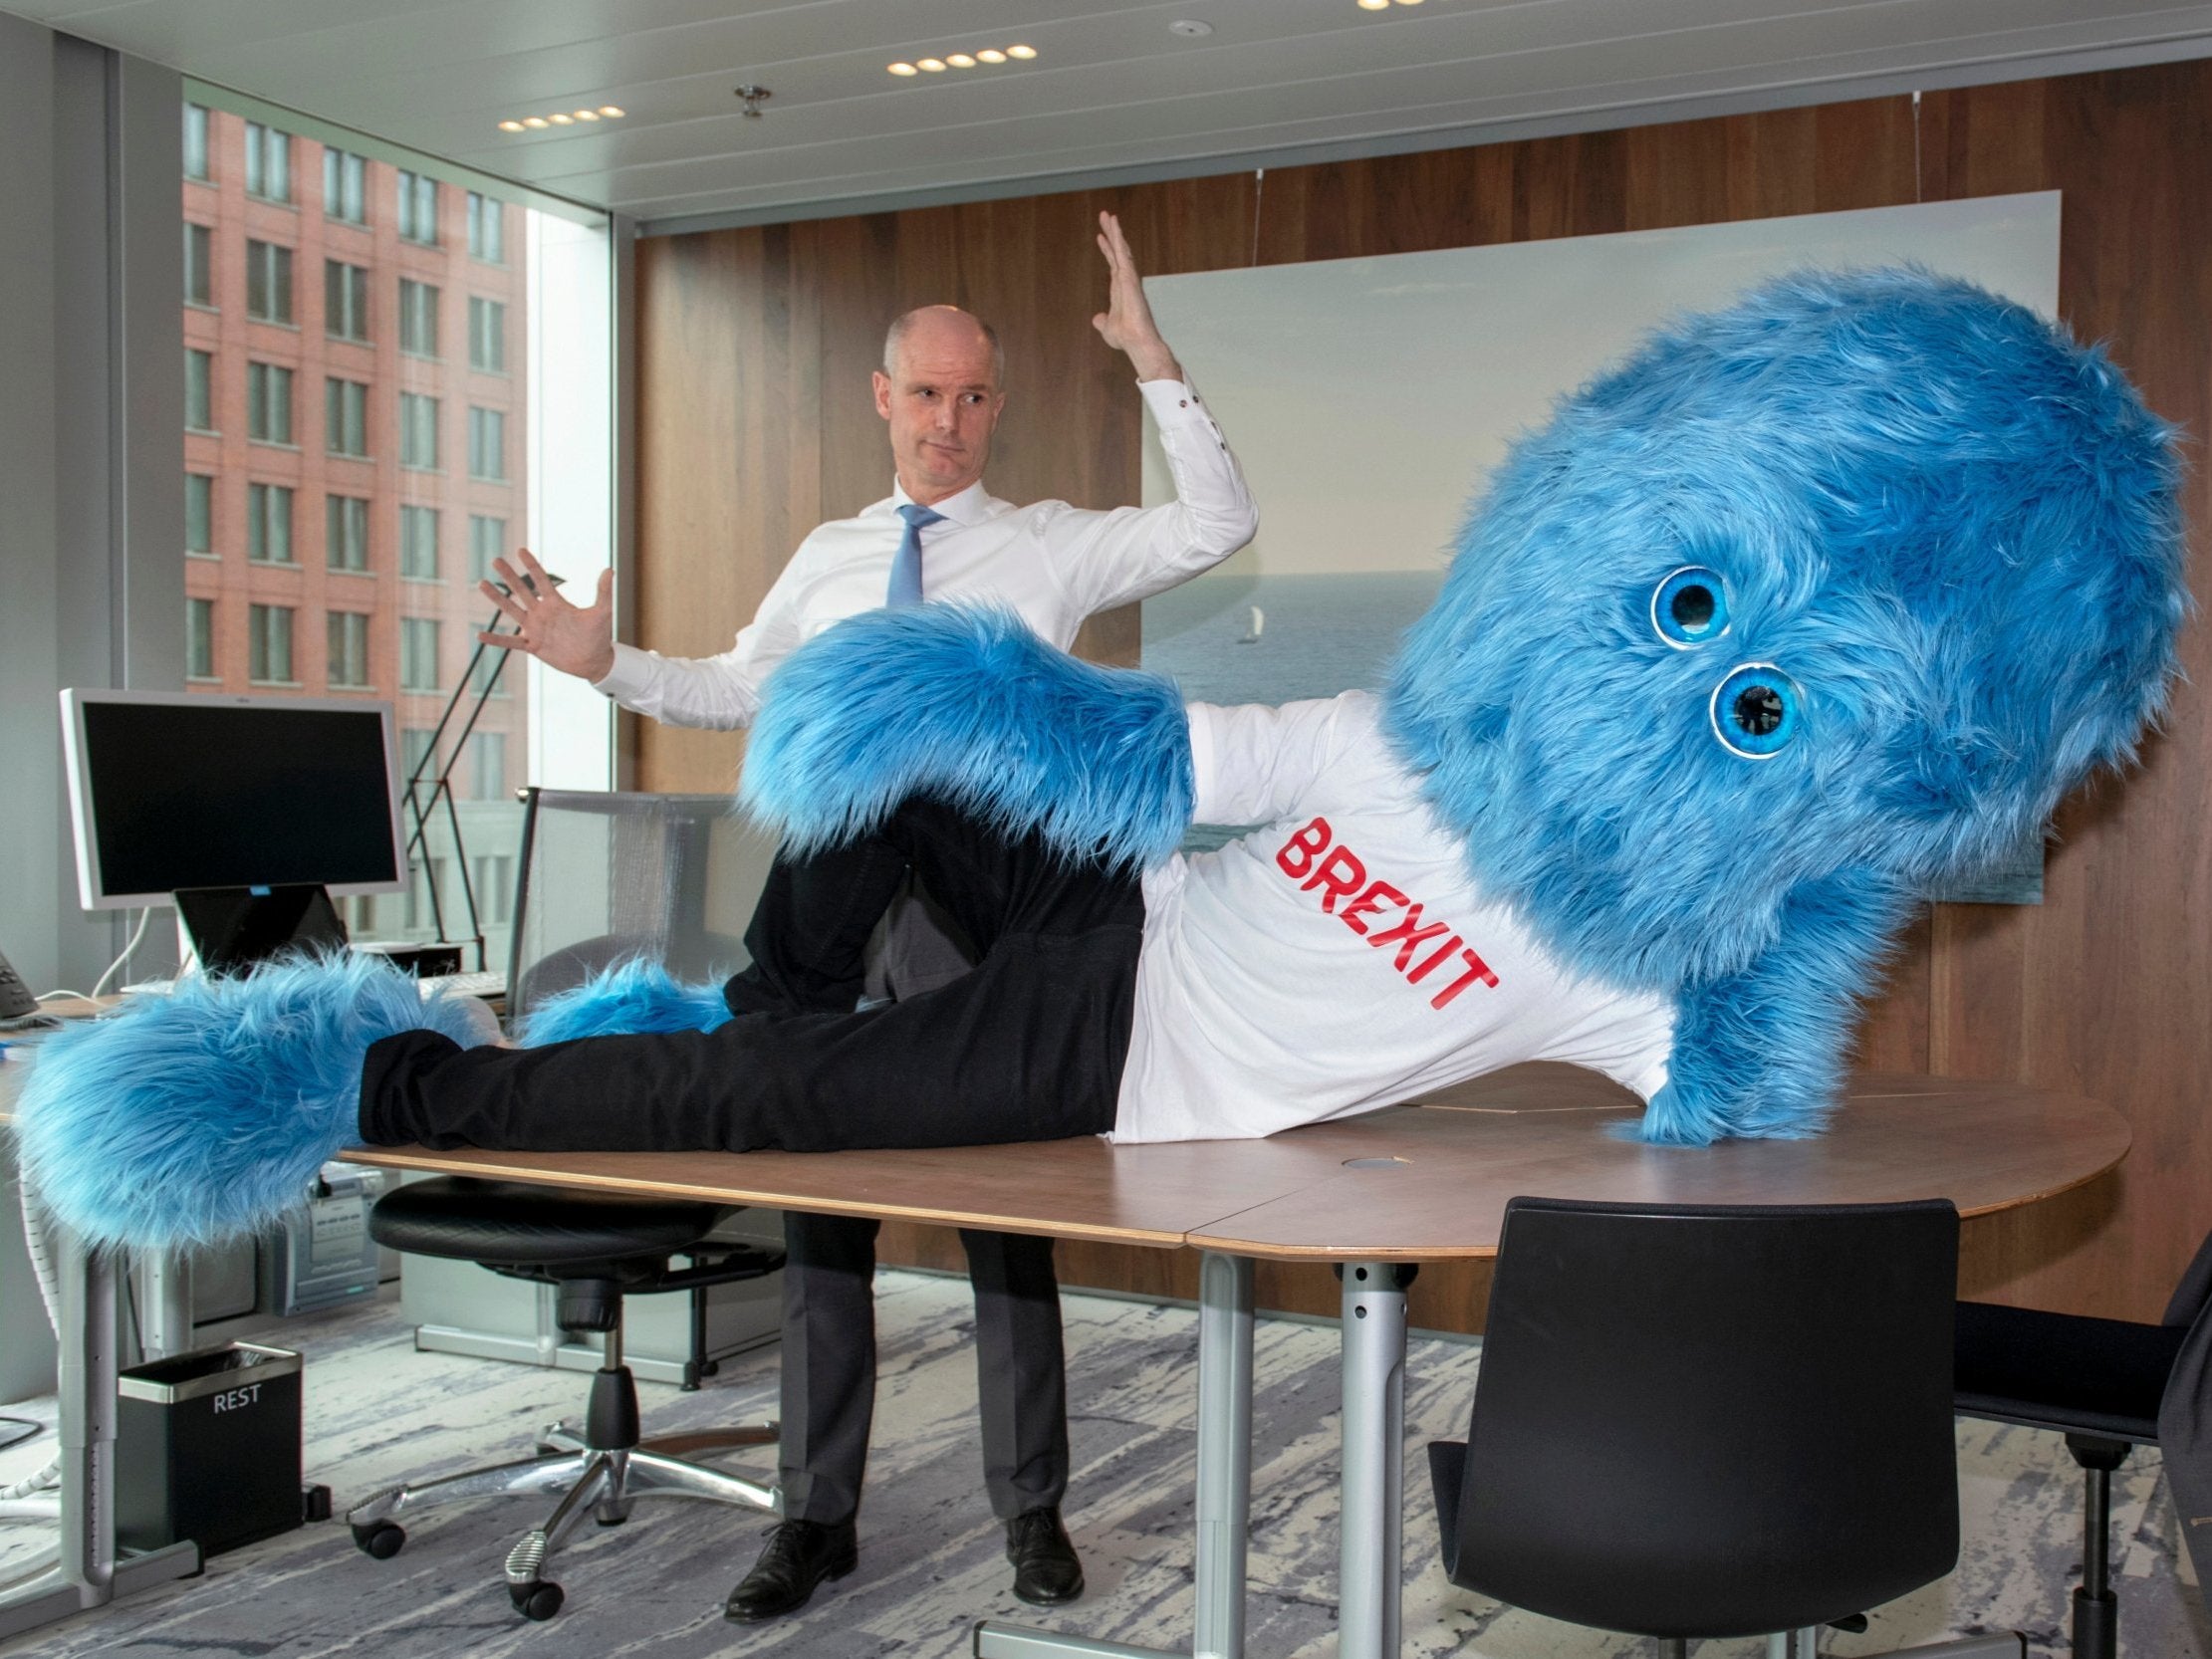 Dutch foreign minister Stef Blok tweeted this image of a hairy blue Brexit monster on his desk in The Hague on Thursday